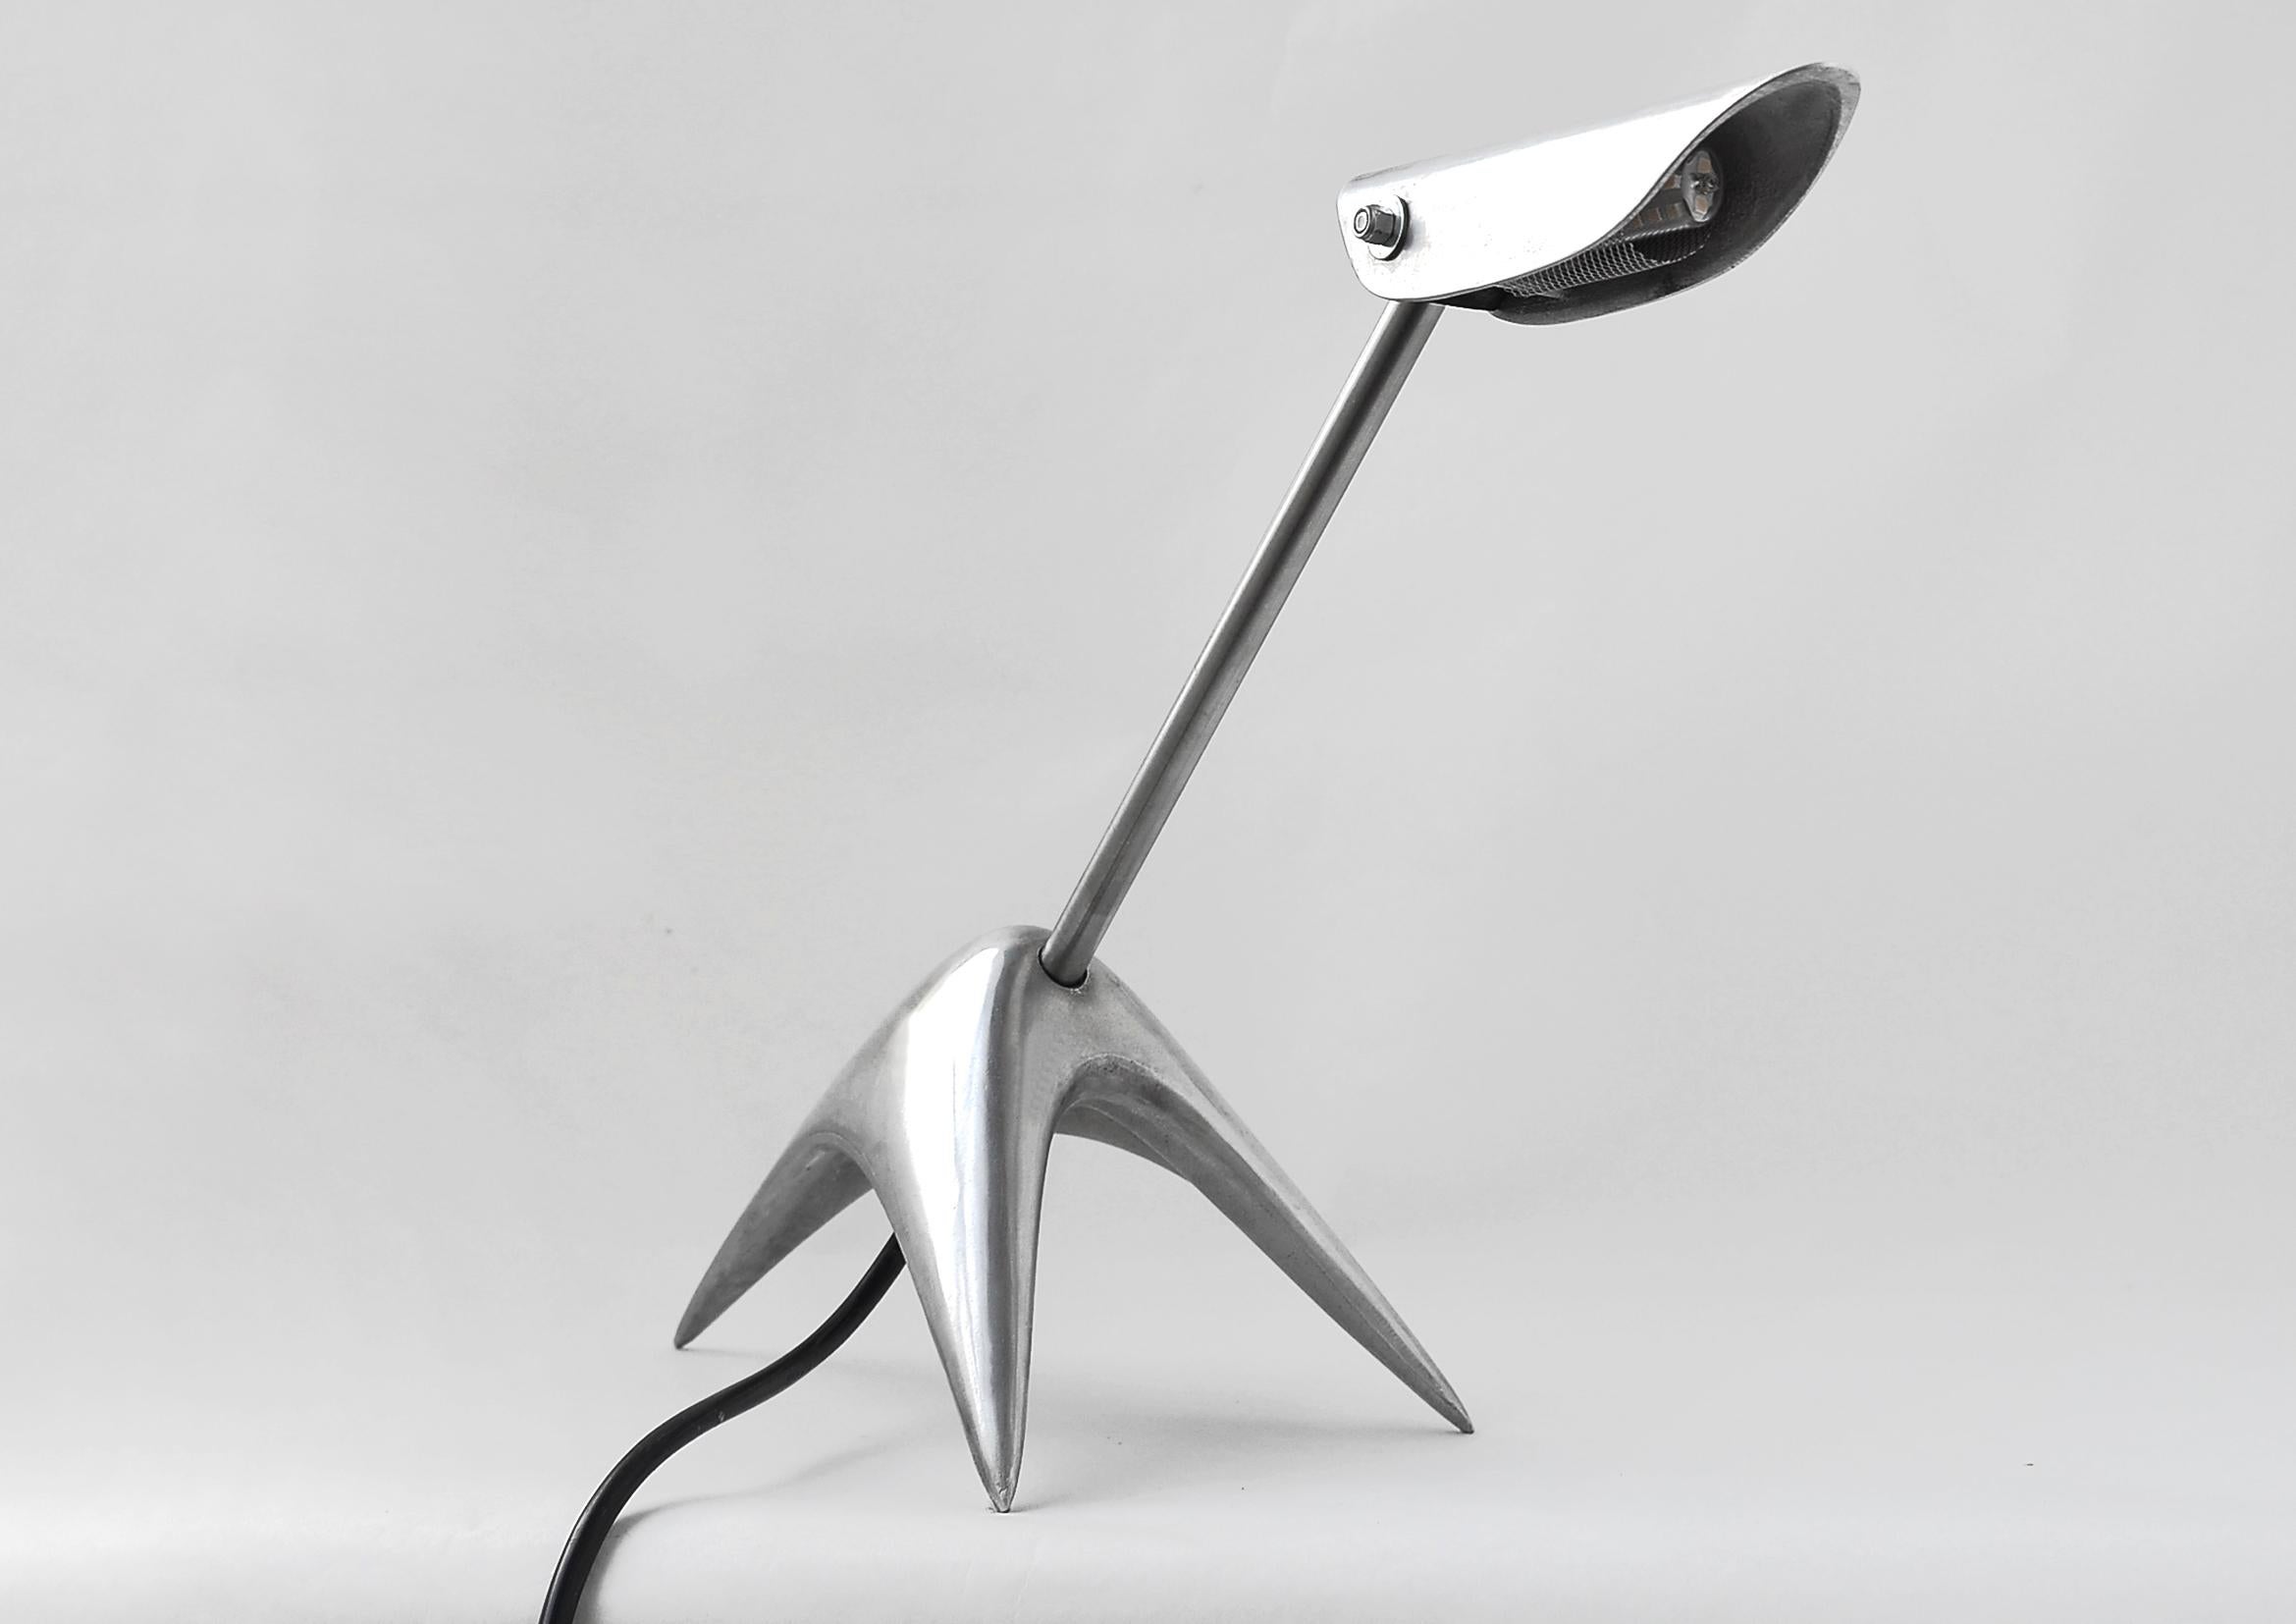 BB3Pod Desk Lamp by Lucio Rossi
Dimensions: D 20 x W 65  x H 45  cm
Material: Aluminum, Stainless steel.
Weight: 2,35kg

The BB3Pod collectible edition is a desk lamp designed for small tables and reduced spaces, with an adjustable  head that